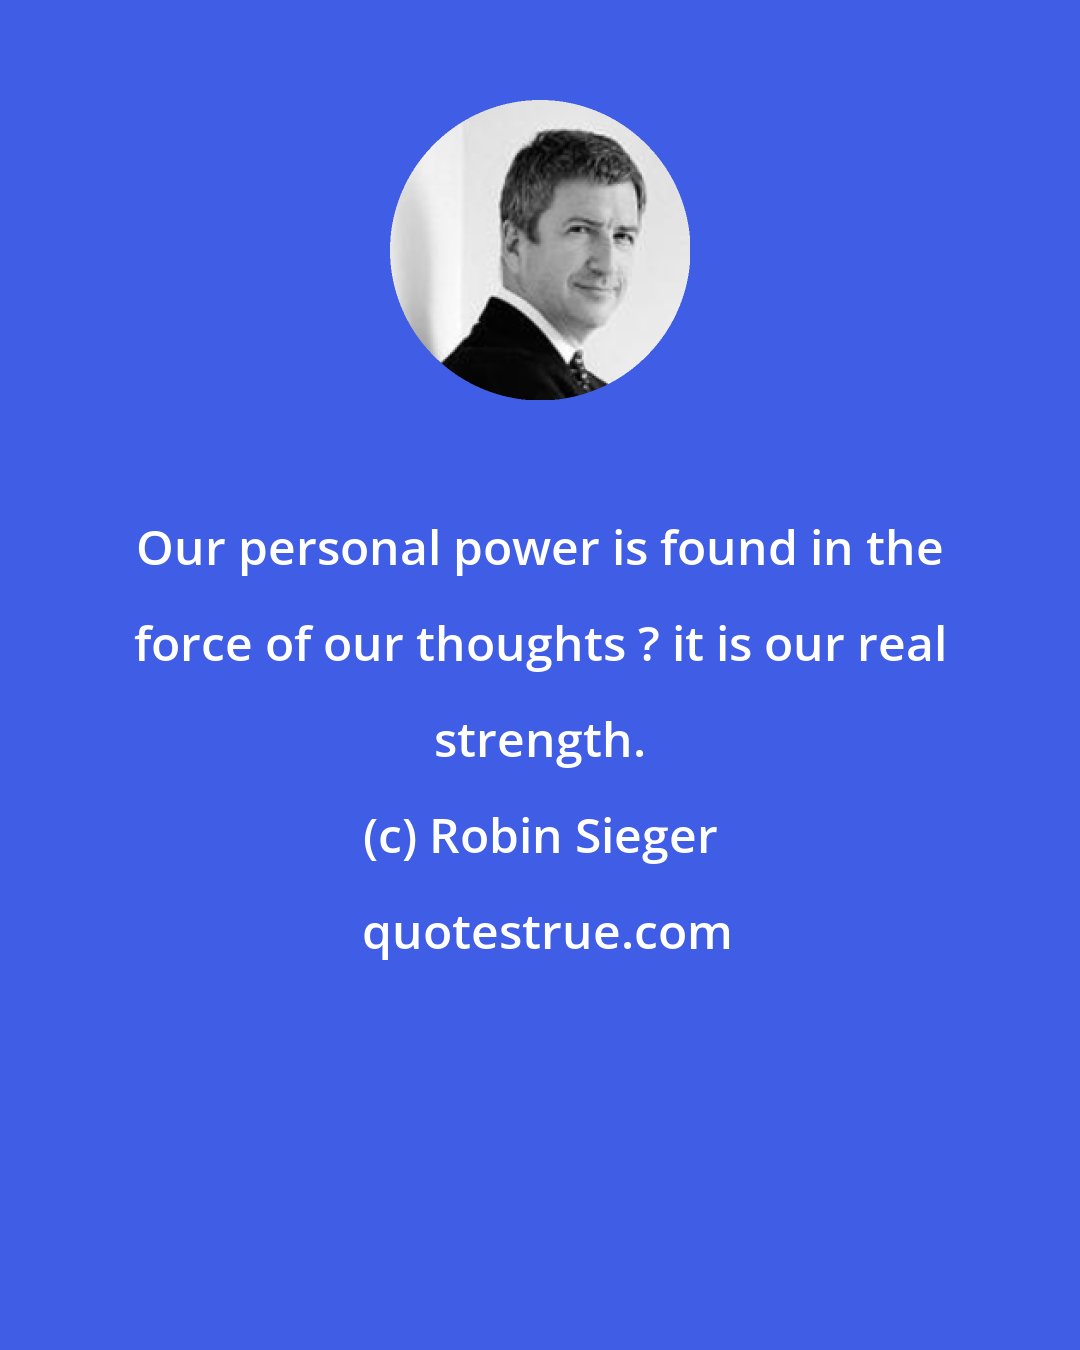 Robin Sieger: Our personal power is found in the force of our thoughts ? it is our real strength.